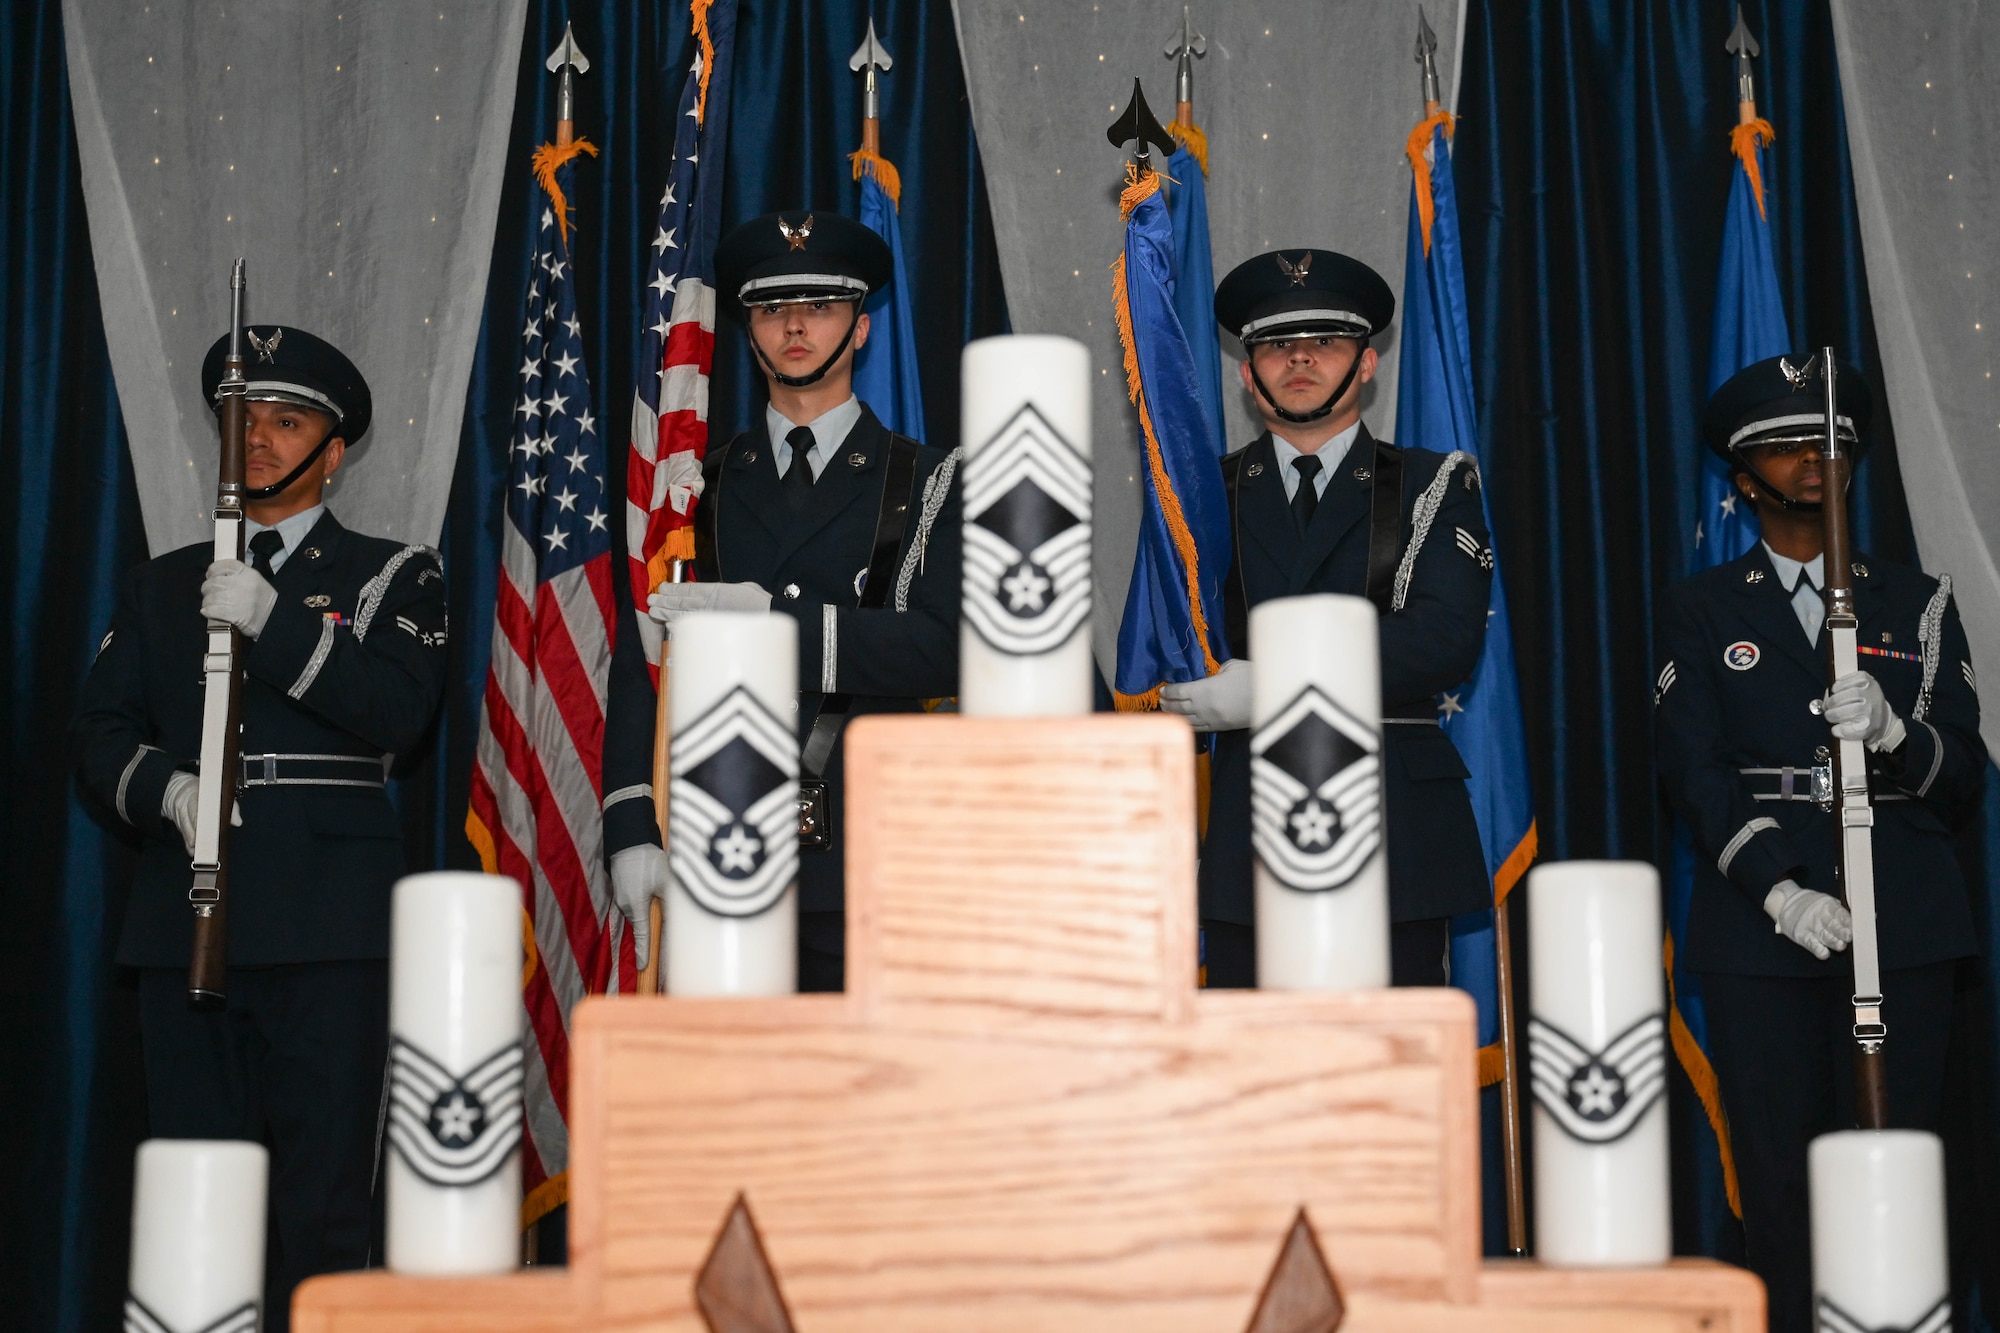 Barksdale Honor Guard stands on stage behind candles